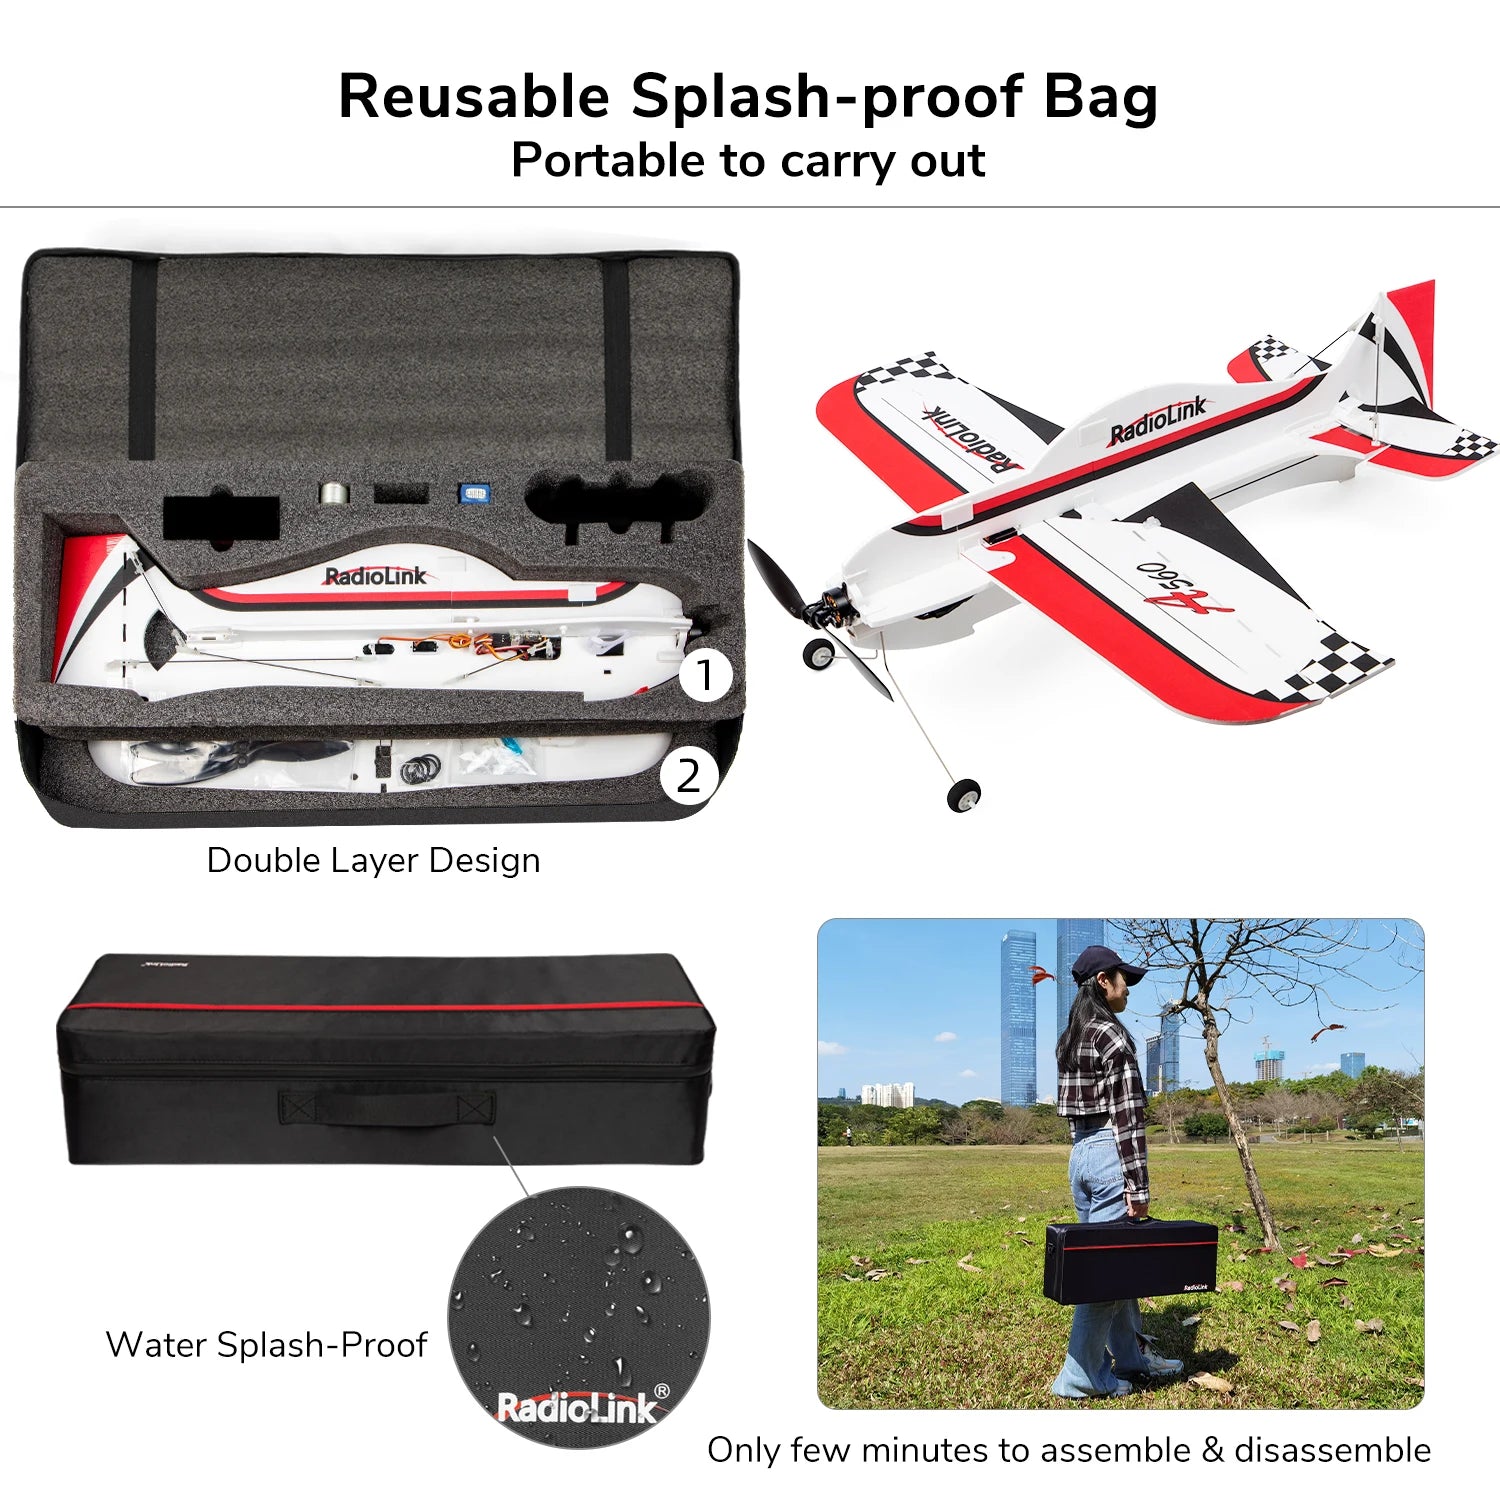 Radiolink A560 4CH RC Airplane, Reusable Splash-proof Bag Portable to carry out RadioLink 2 2 Double Layer Design